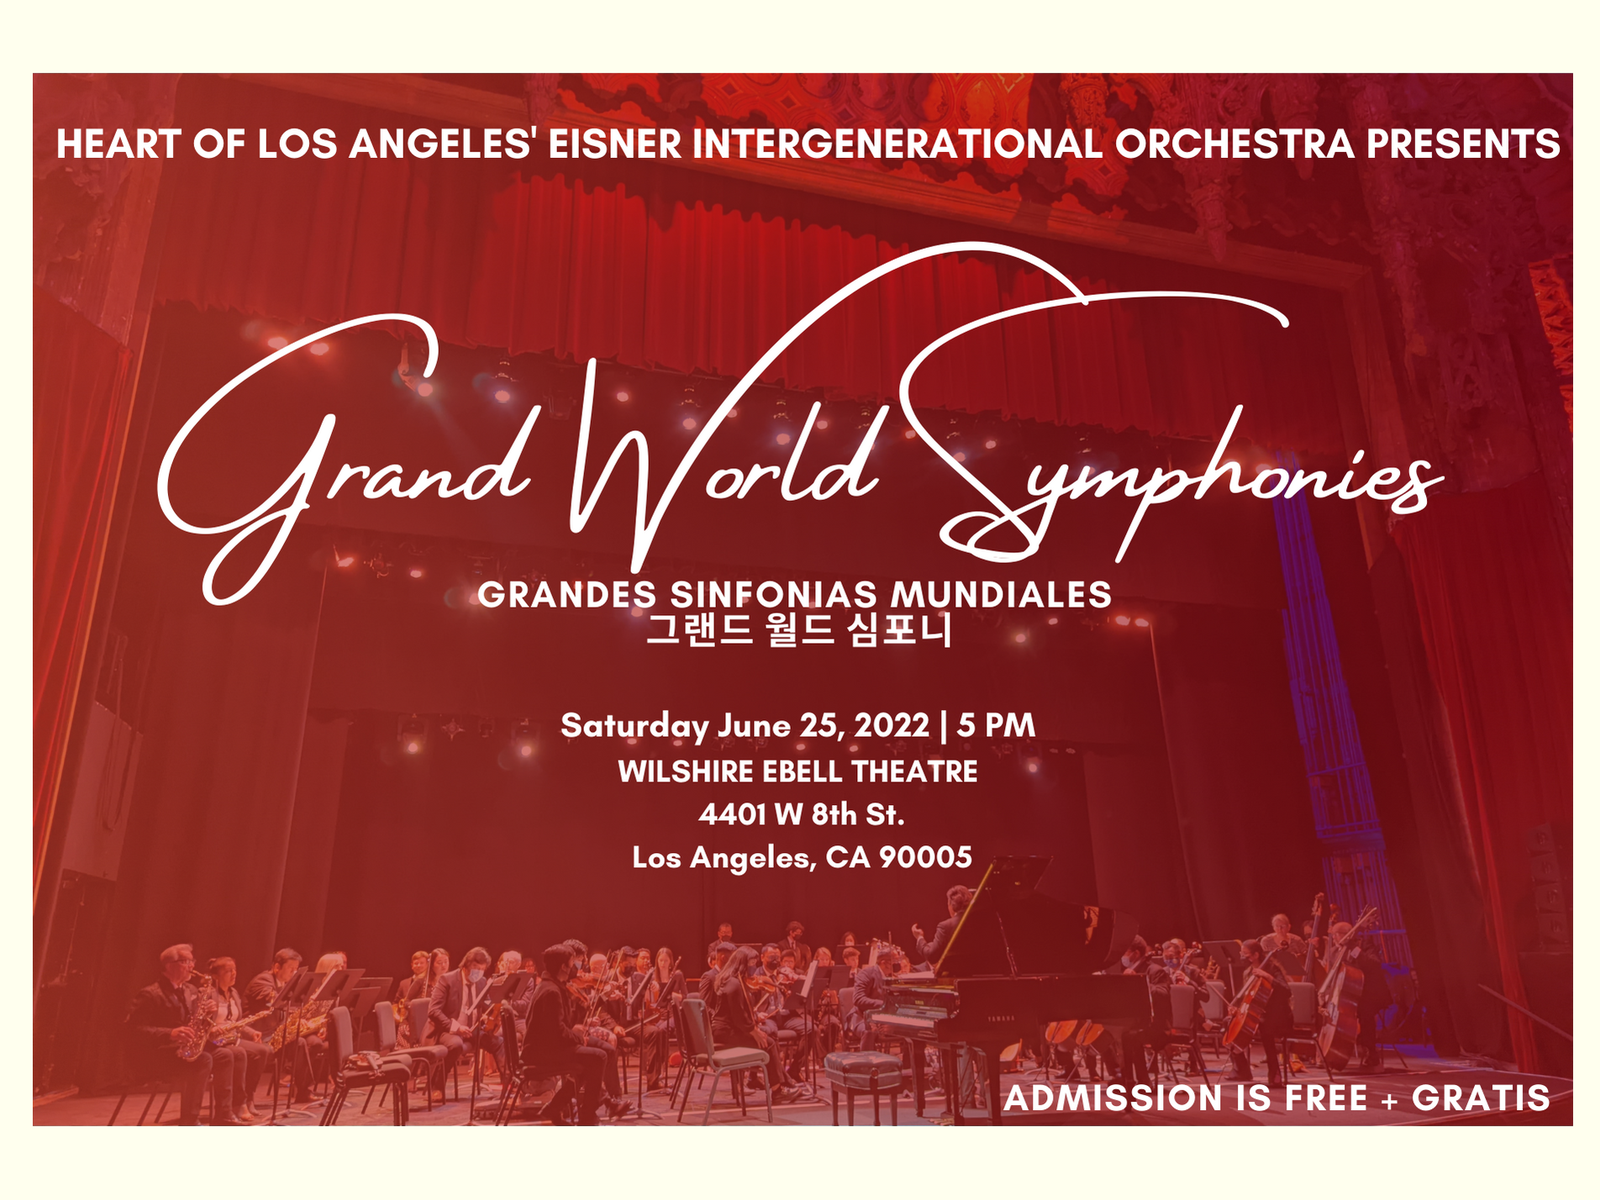 Flyer Description: Heart of Los Angeles Intergenerational Orchestra Final Concert at the Historic Ebell Theatre on Saturday, June 25th at 5:00 PM 